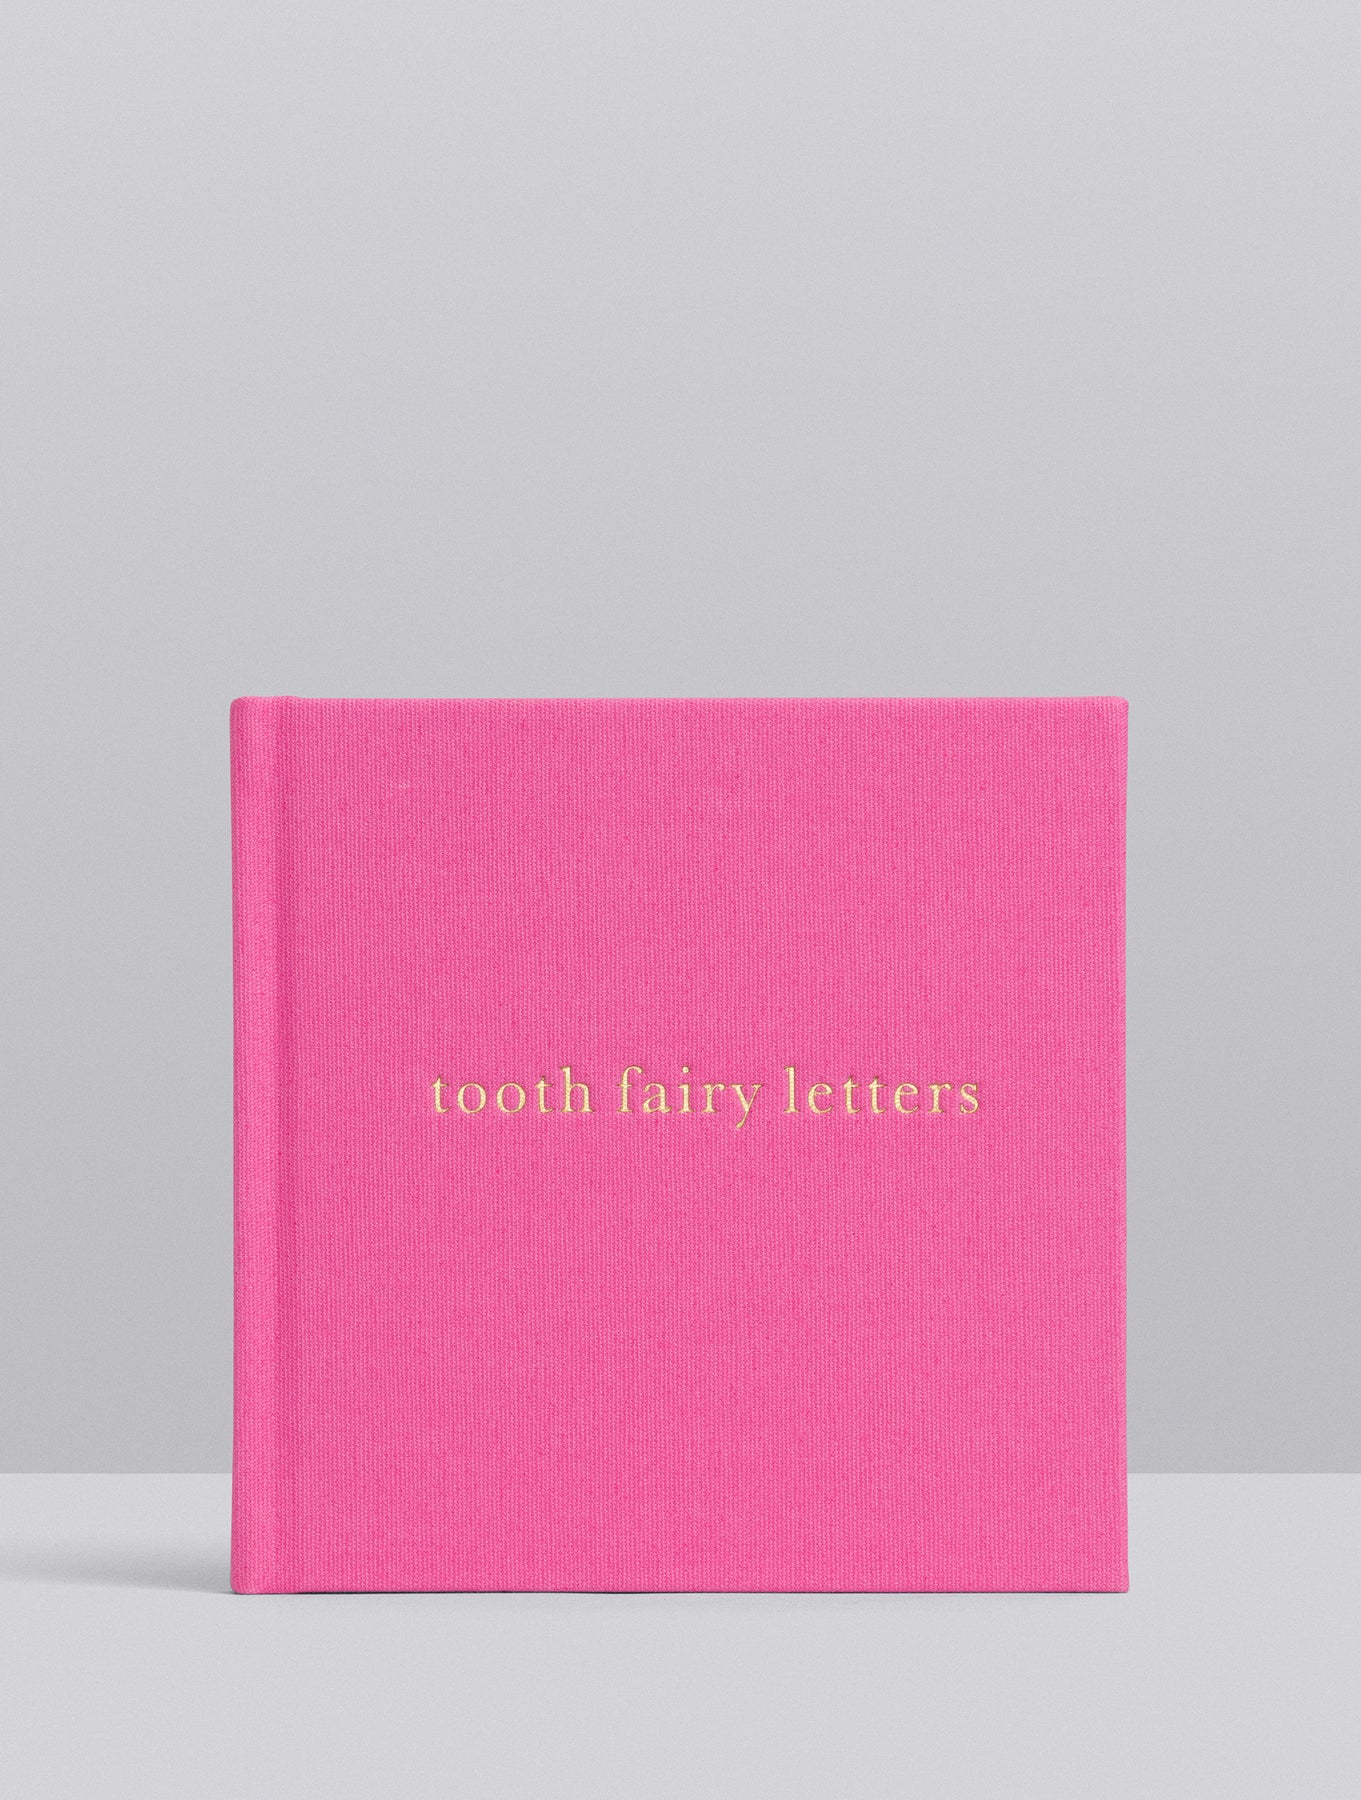 Shop Tooth Fairy Letters - Pink | Burke Decor